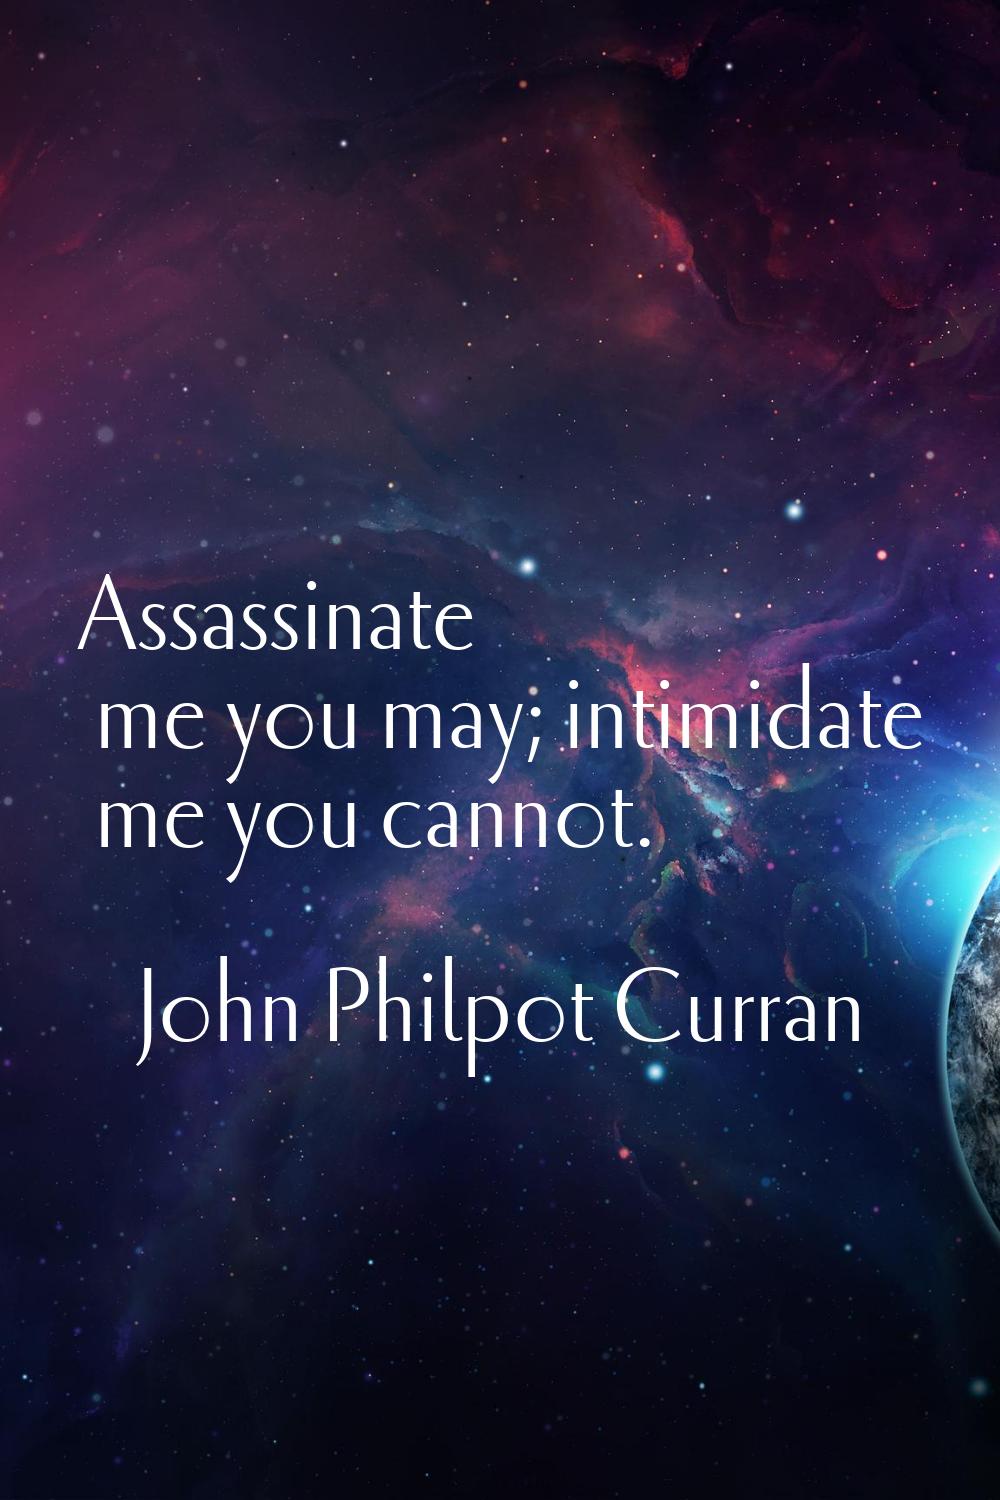 Assassinate me you may; intimidate me you cannot.